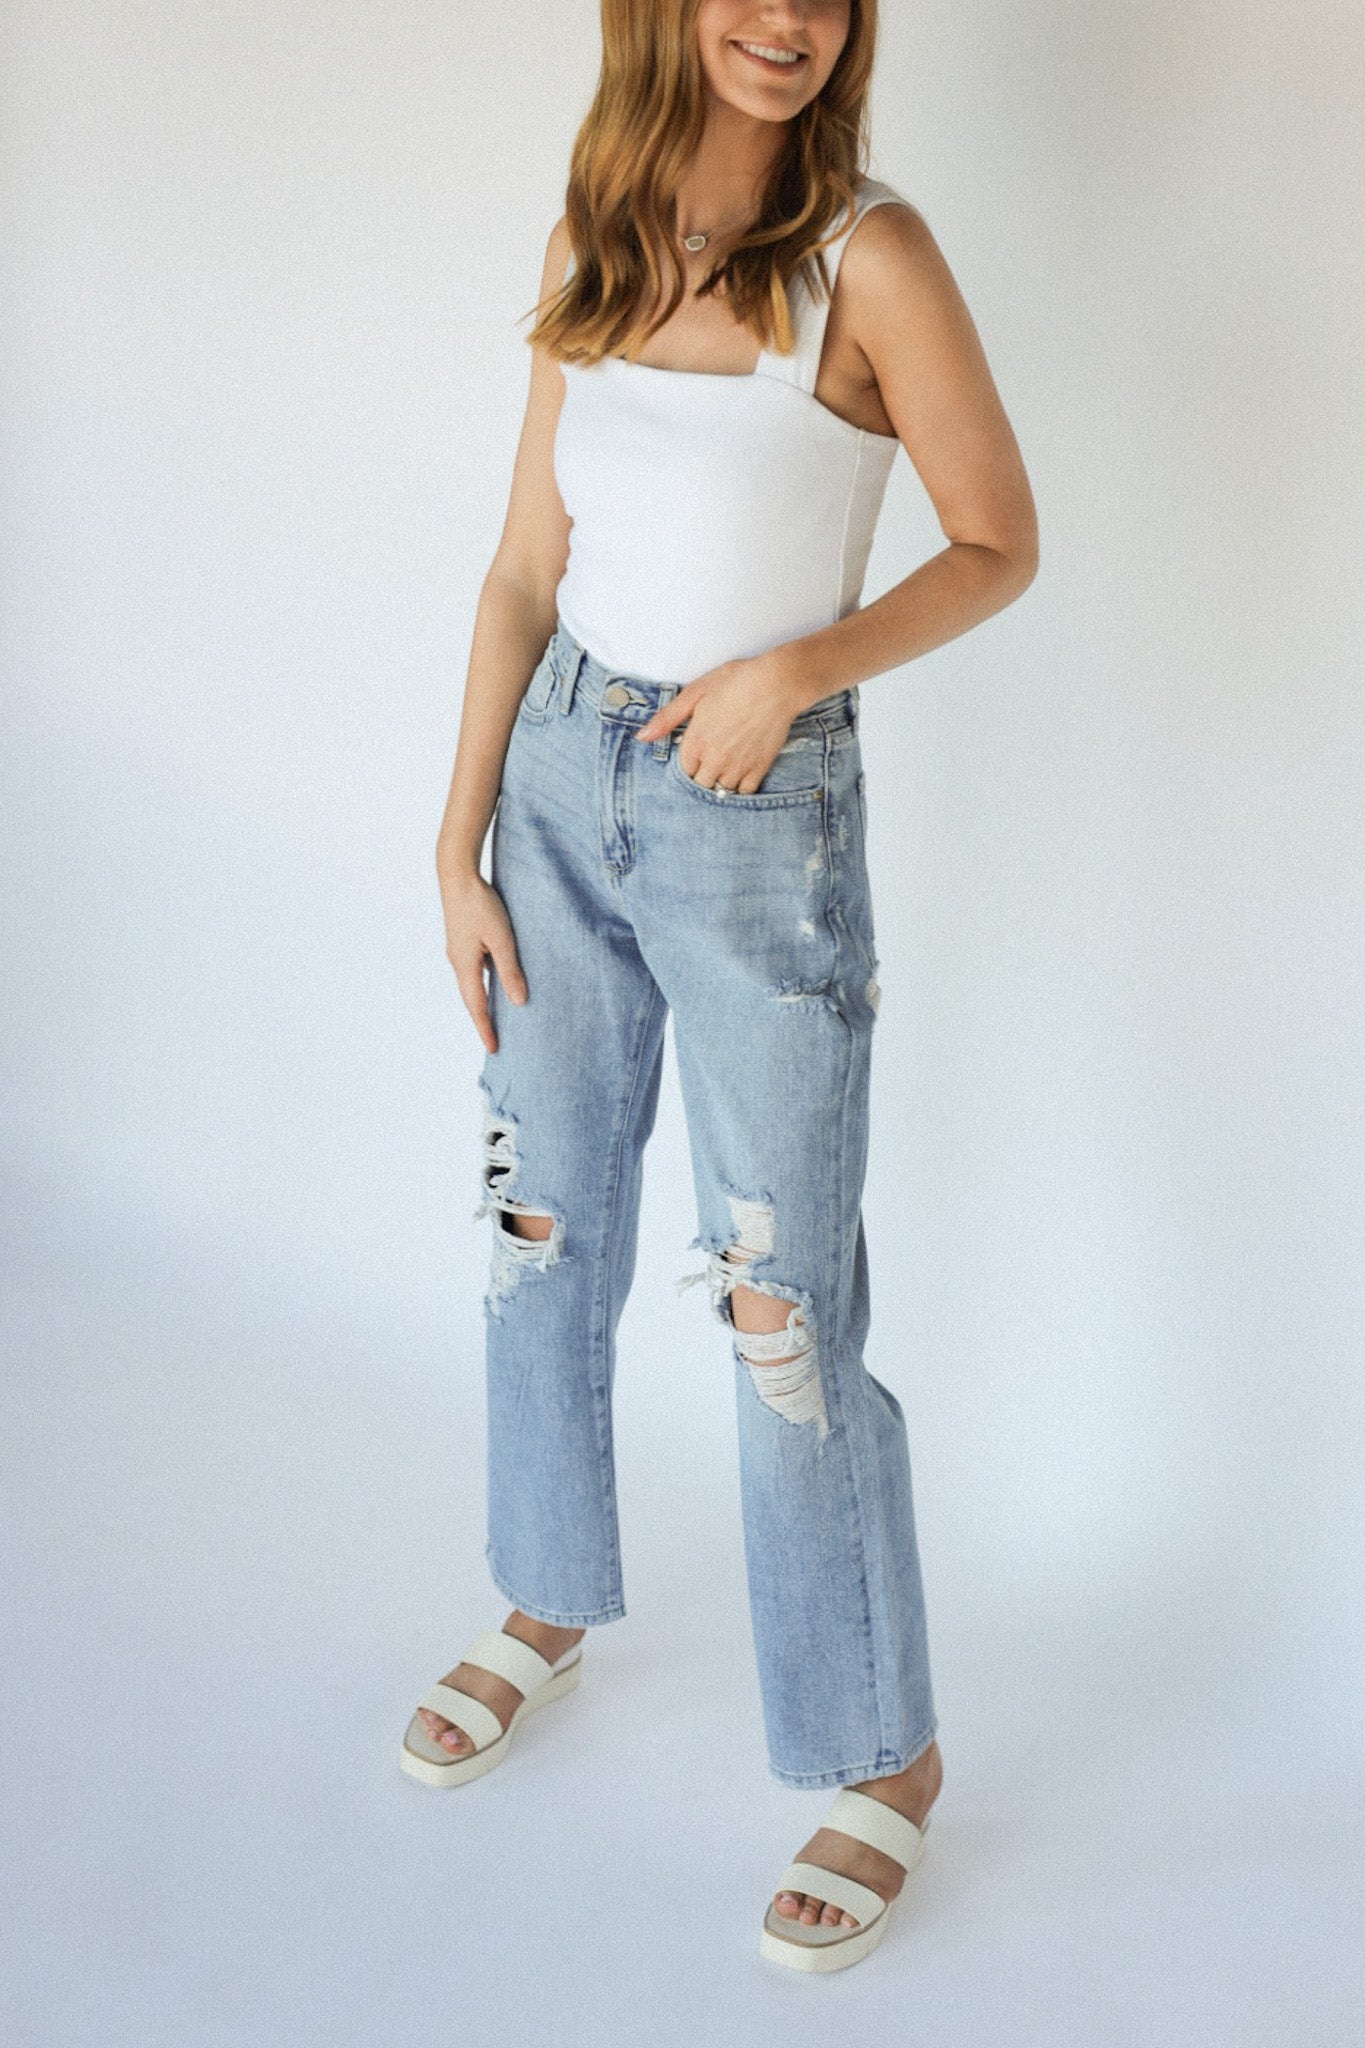 Not your dad's high rise denim